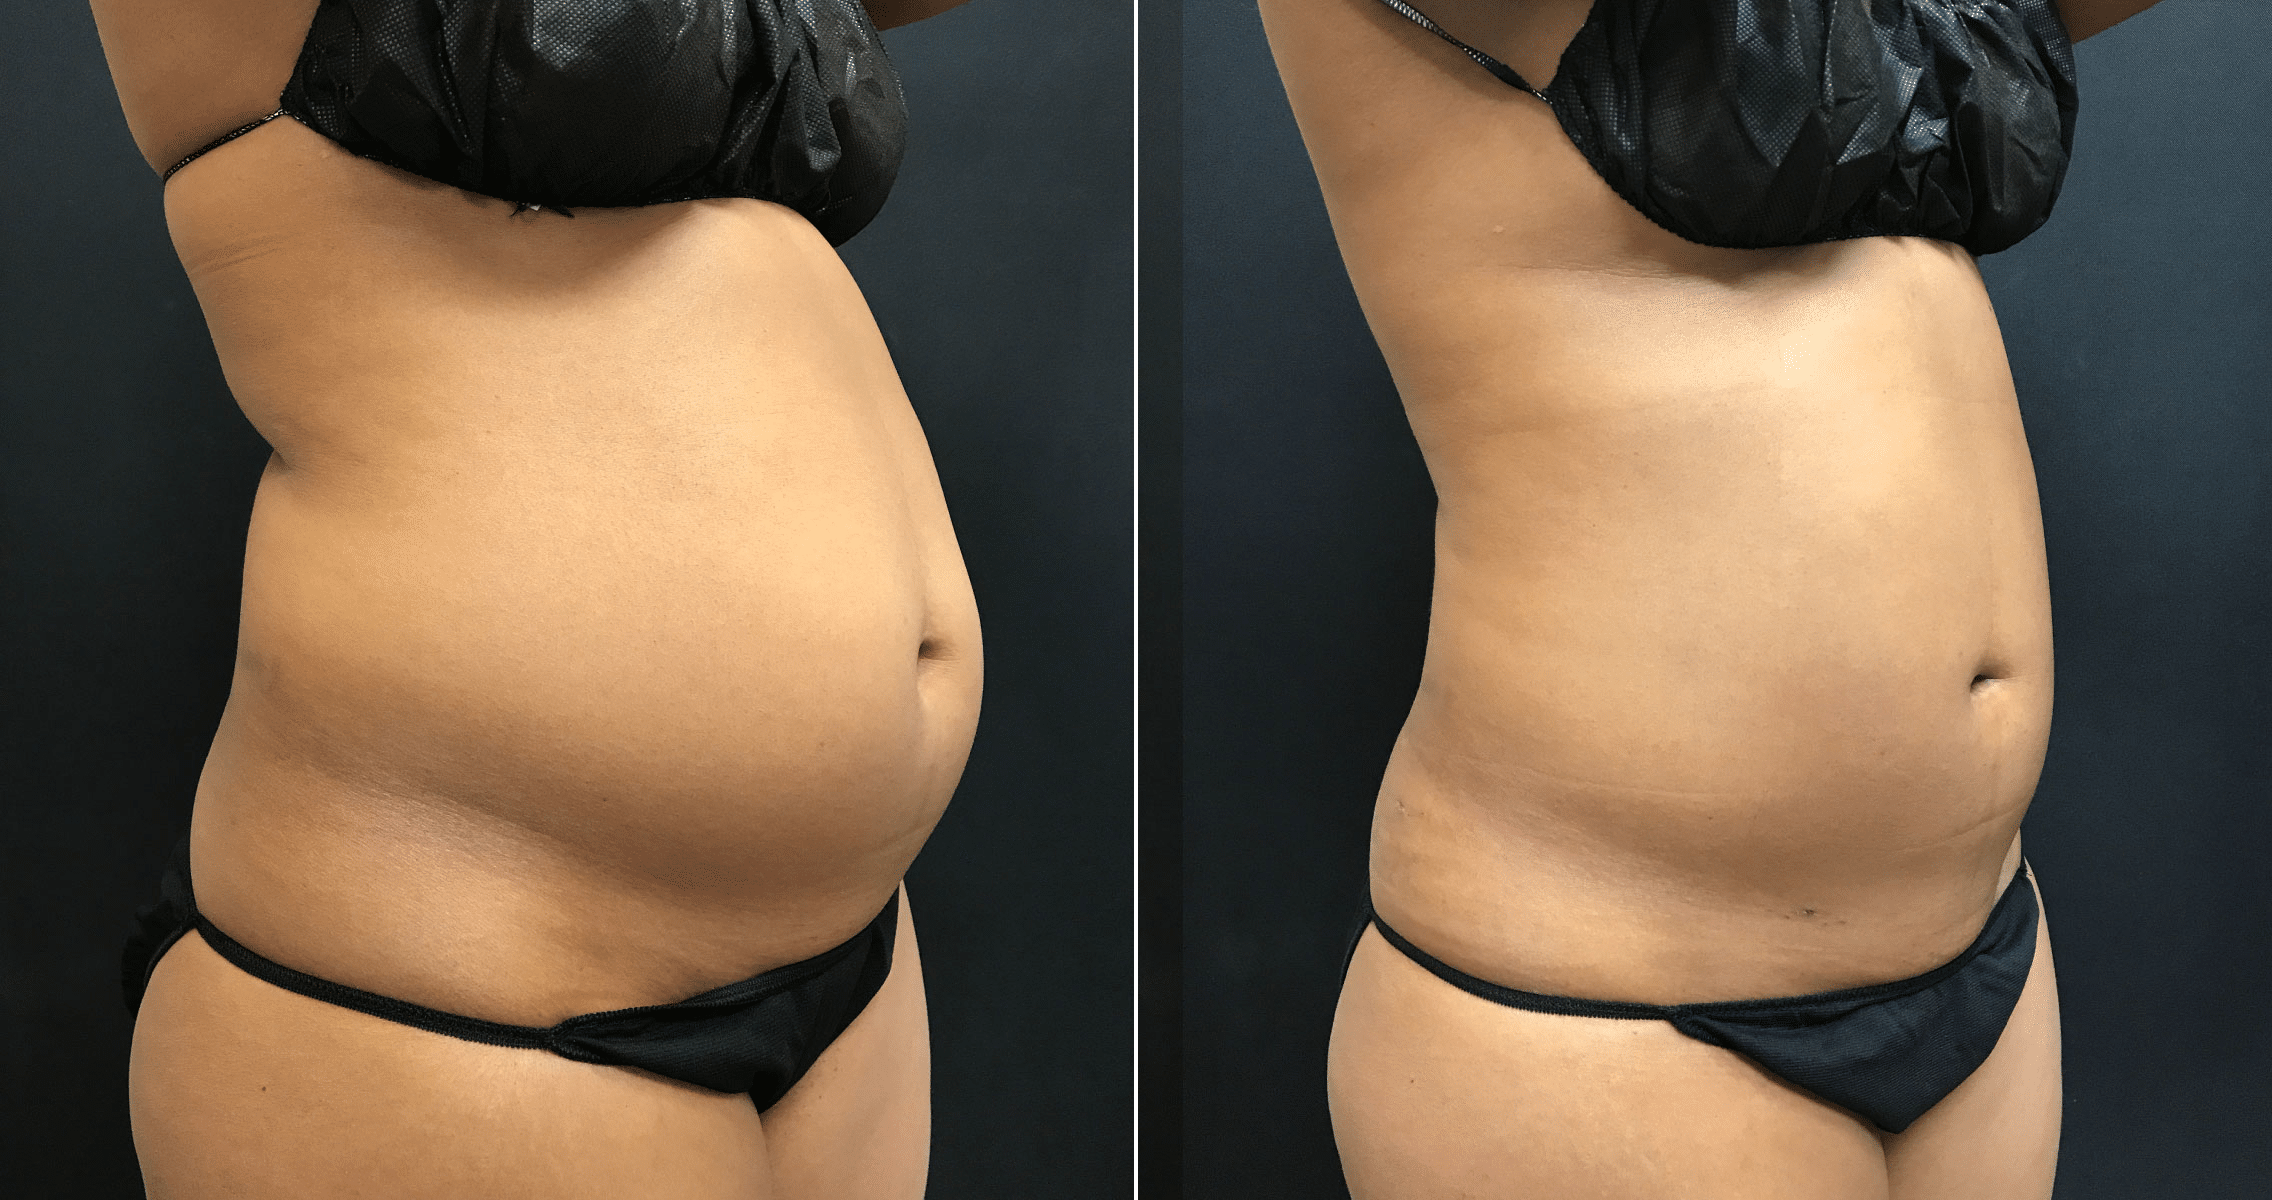 I have saggy boobs, a belly, back rolls and cellulite – I let it